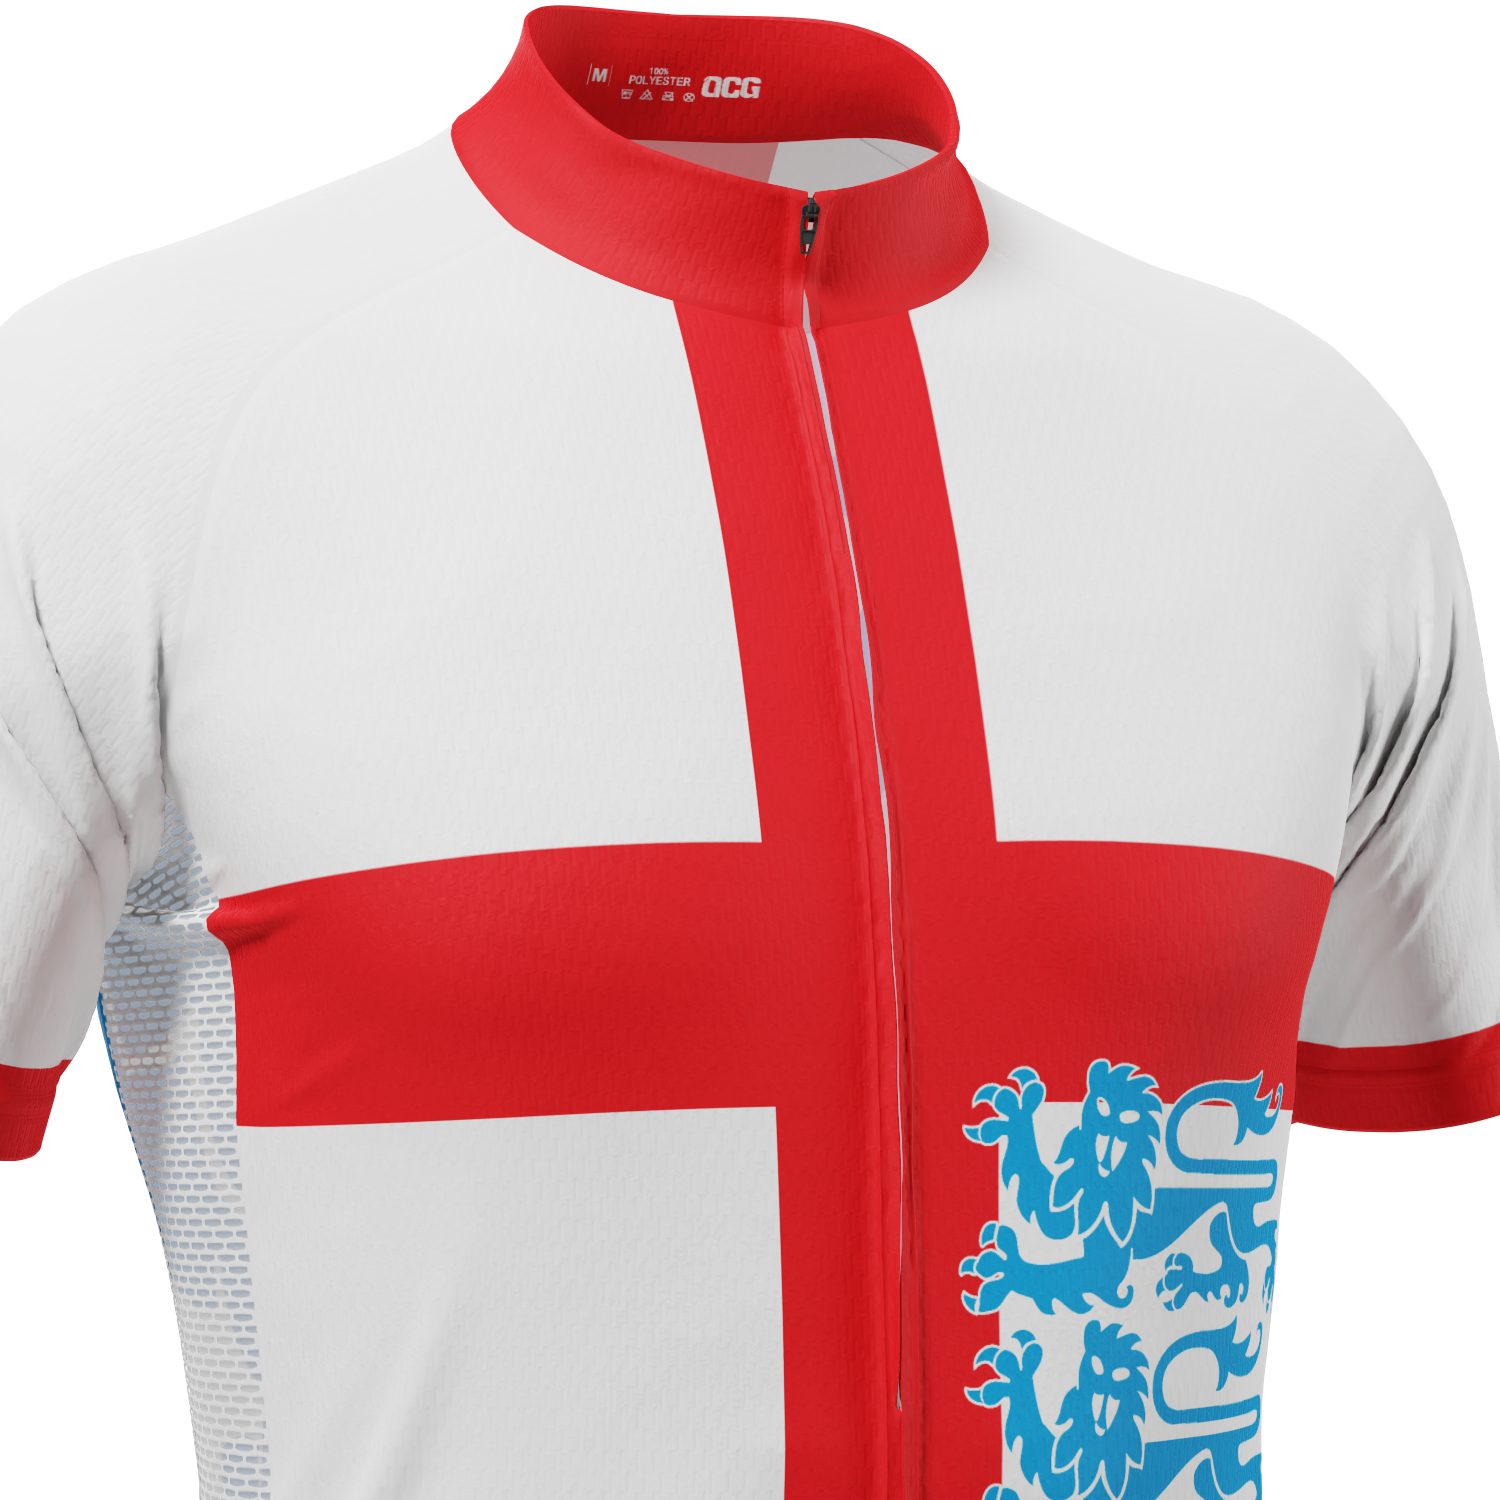 Men's Three Lions England National Flag Short Sleeve Cycling Jersey